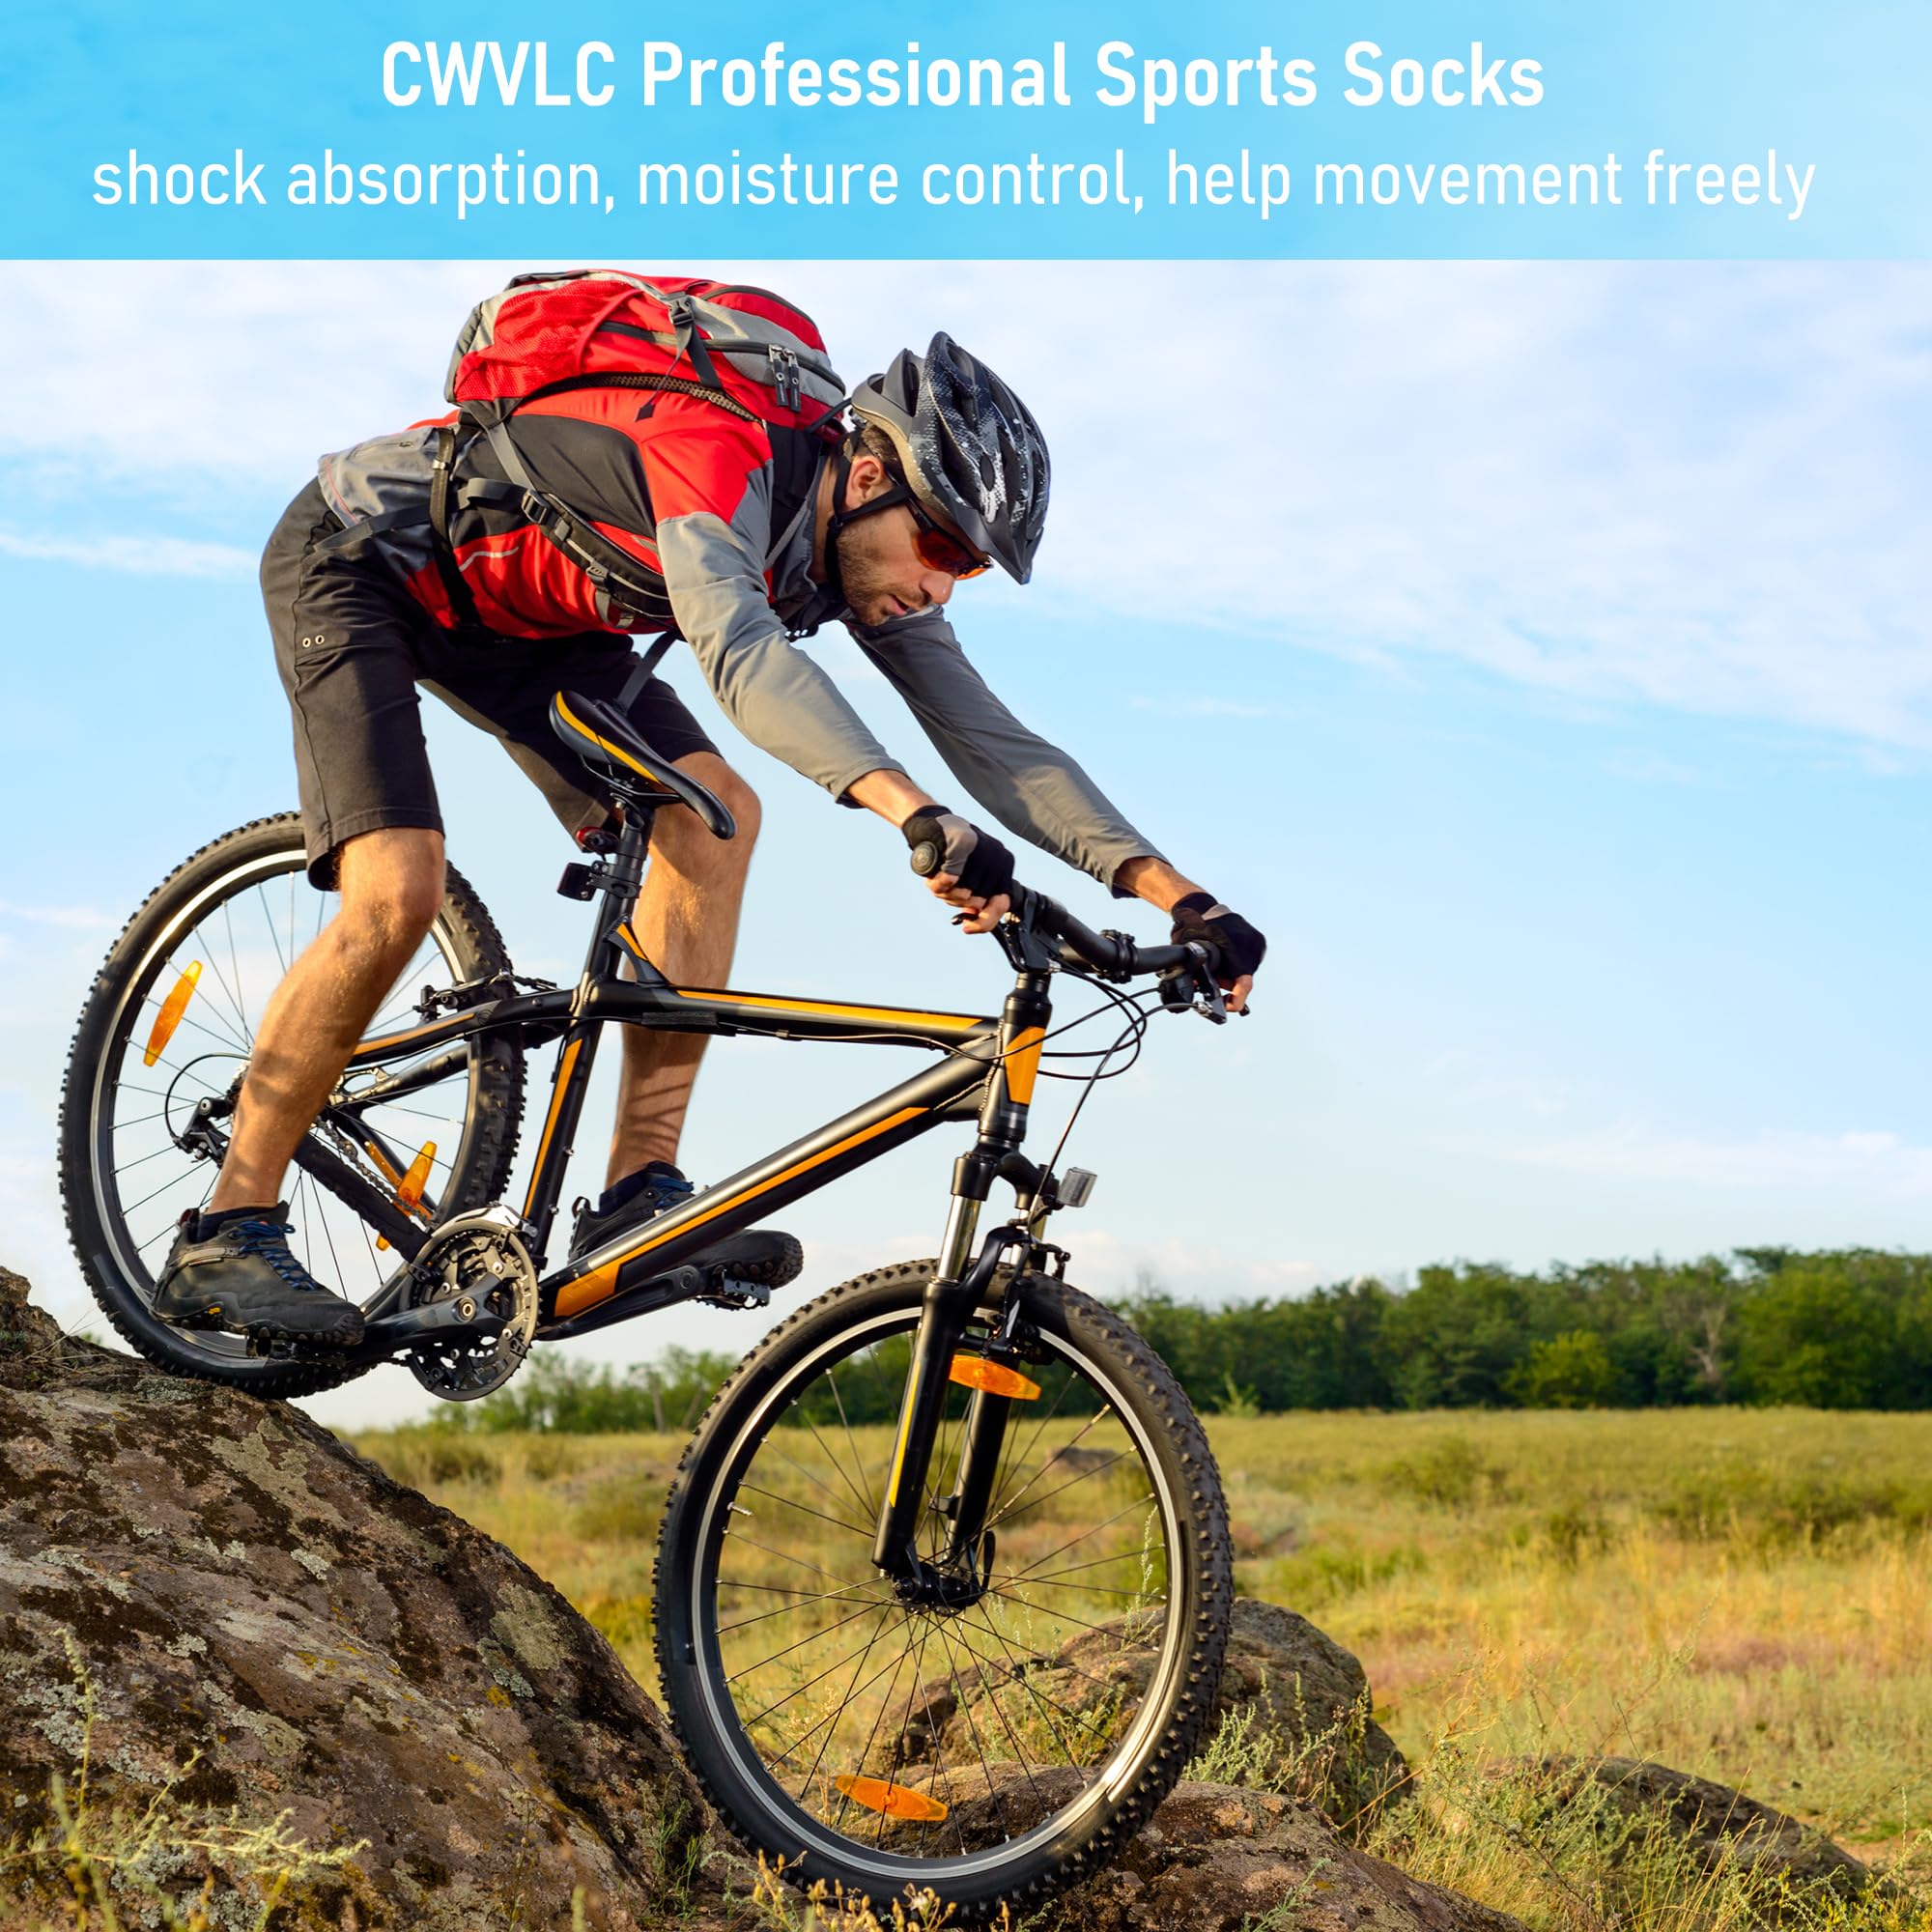 CWVLC Unisex Cushioned Compression Athletic Ankle Socks Multipack, 3-pairs Black, L (10.5-13 W US/ 9-11.5 M US)